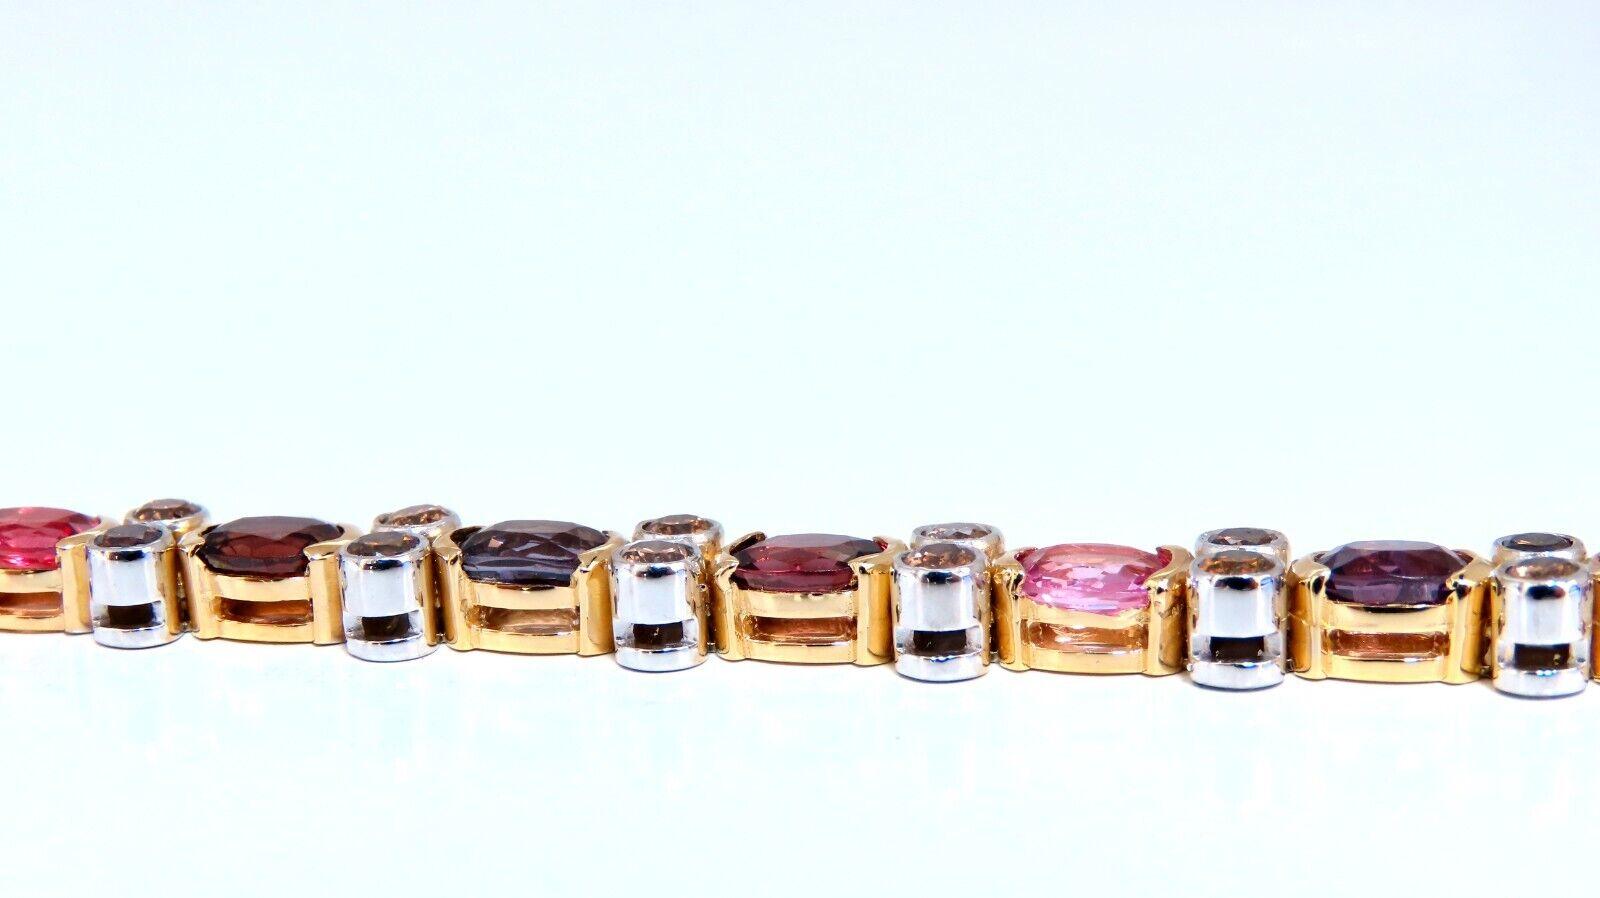 Gem-line Prime

14.38ct Natural Spinel bracelet.

Red, Blues, Orange, Yellows and pinks

Average 6 x 4mm

 

Natural Round Diamonds: 3.20ct. 

Fancy Natural Orange Brown Vs-2 clarity.

14kt. white & yellow gold, 23 grams

Bracelet measures 7